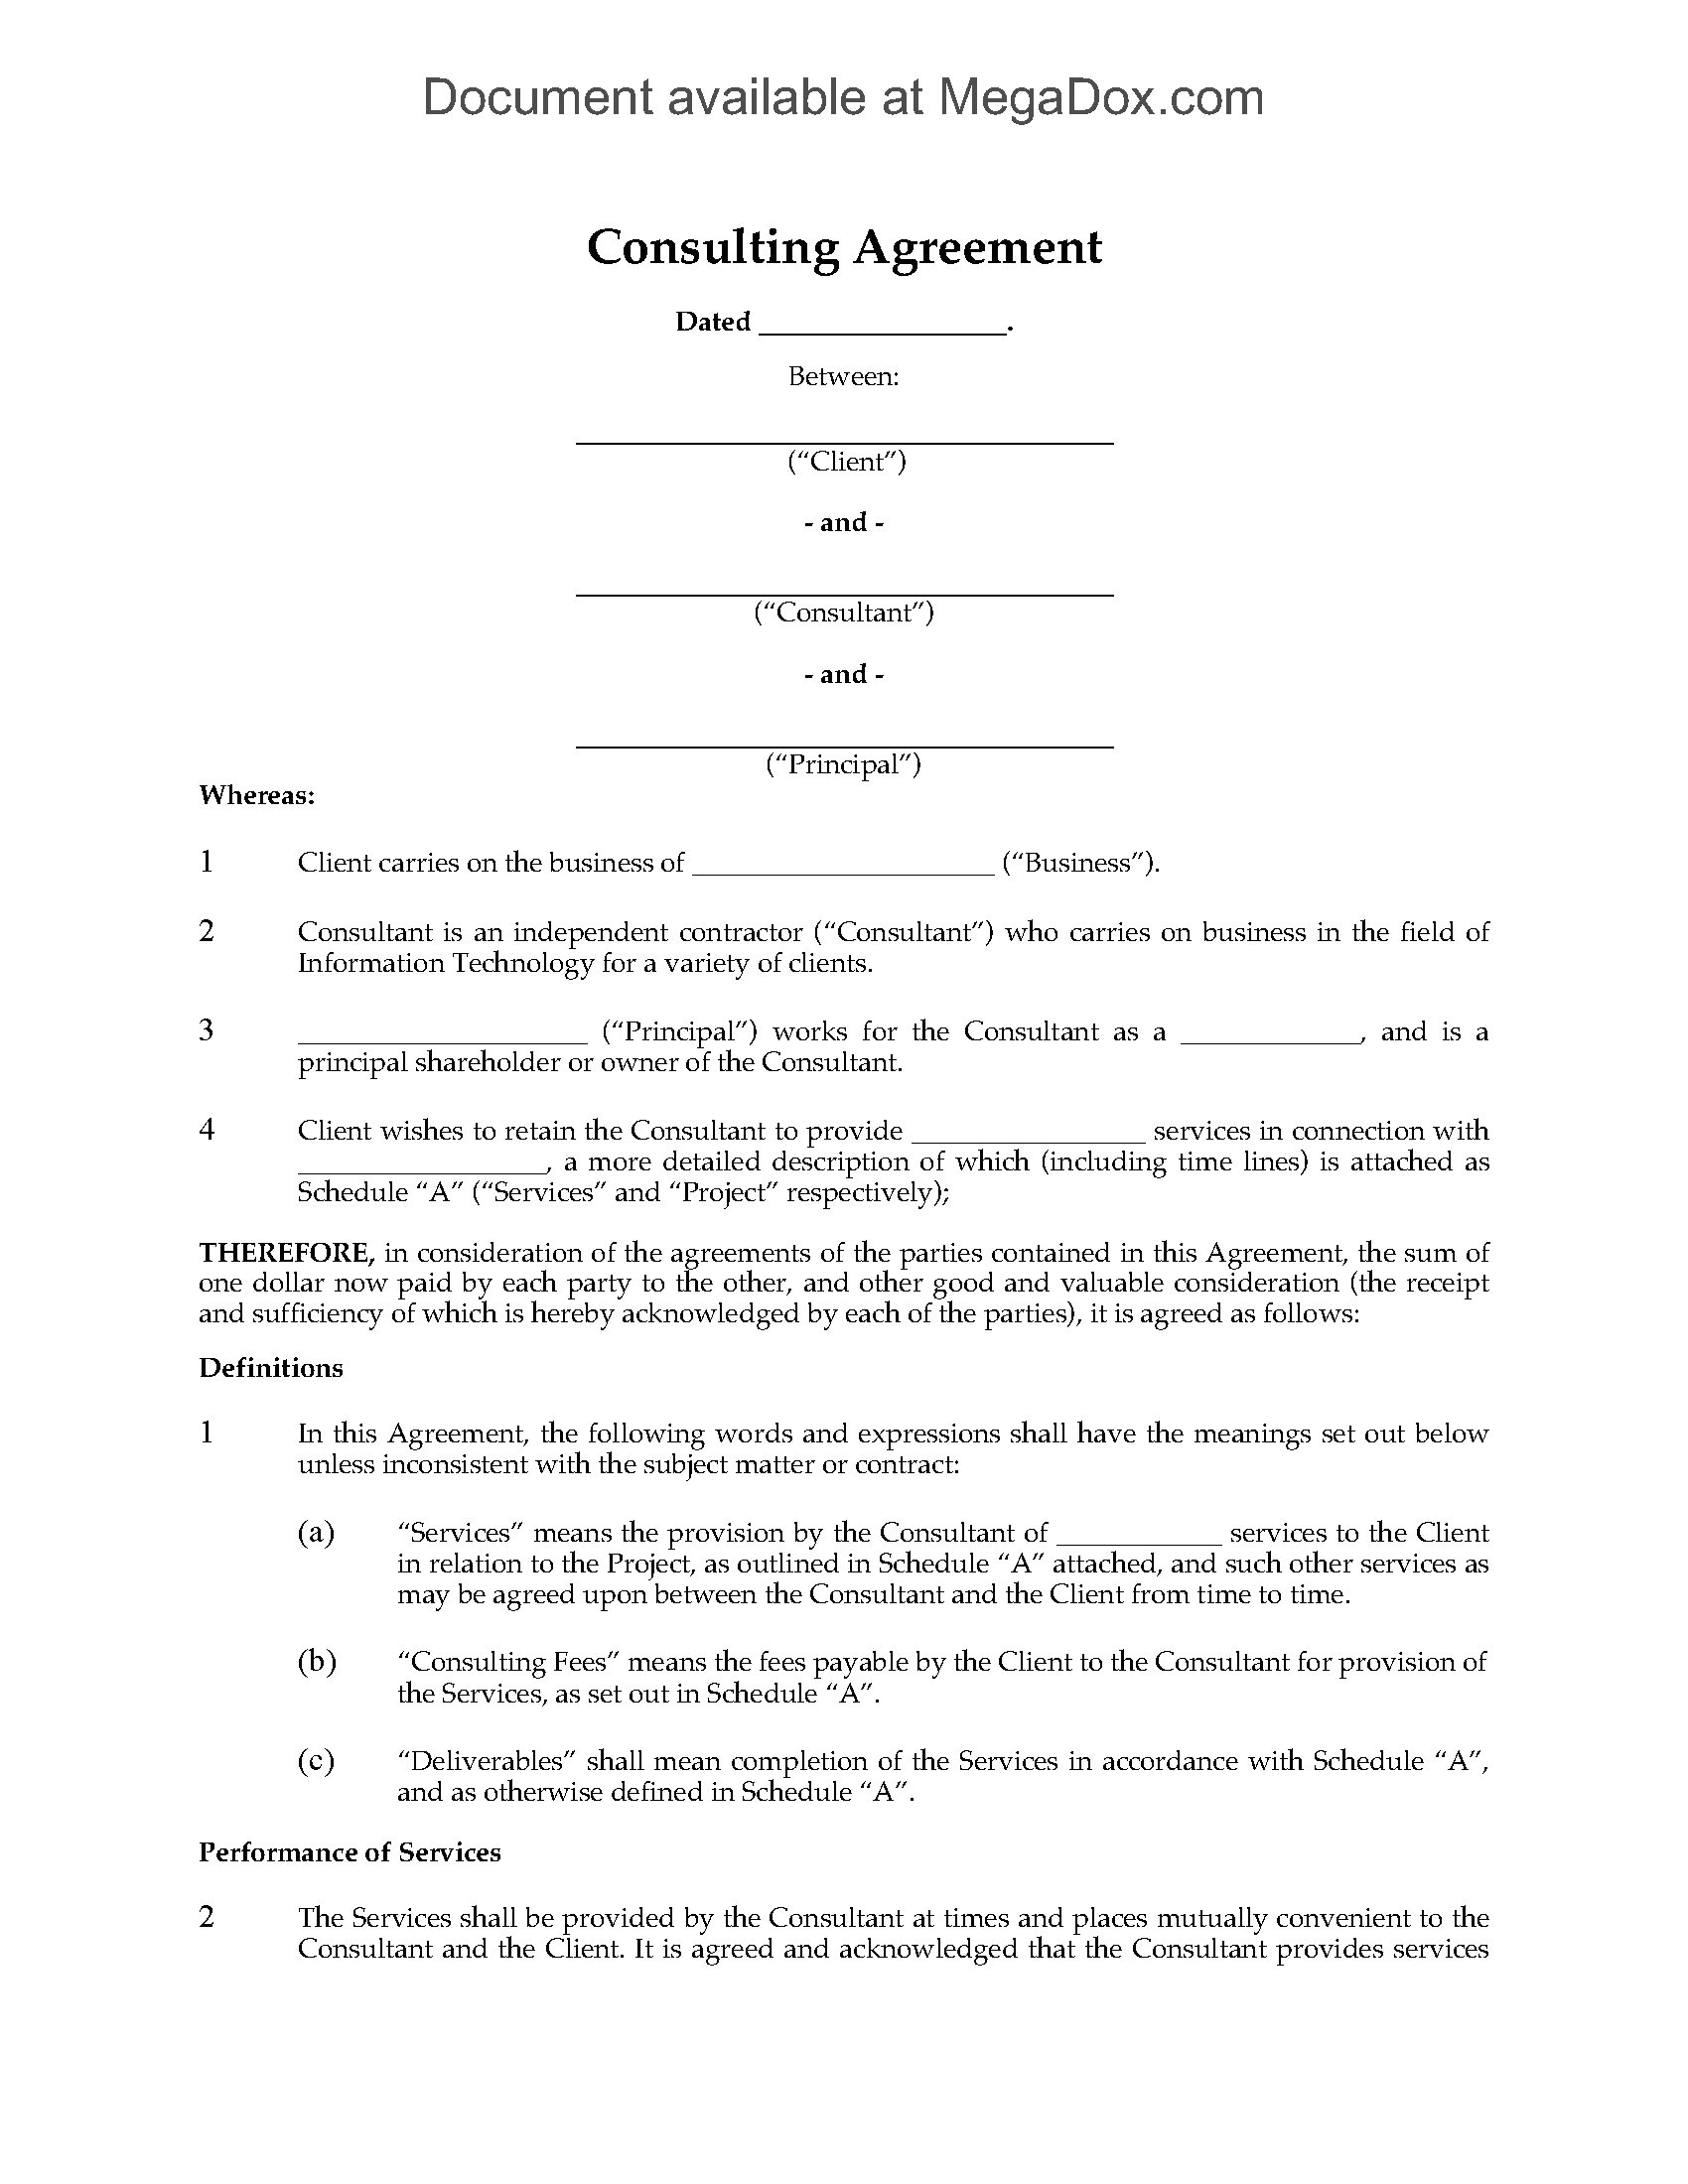 canada consulting agreement for it services